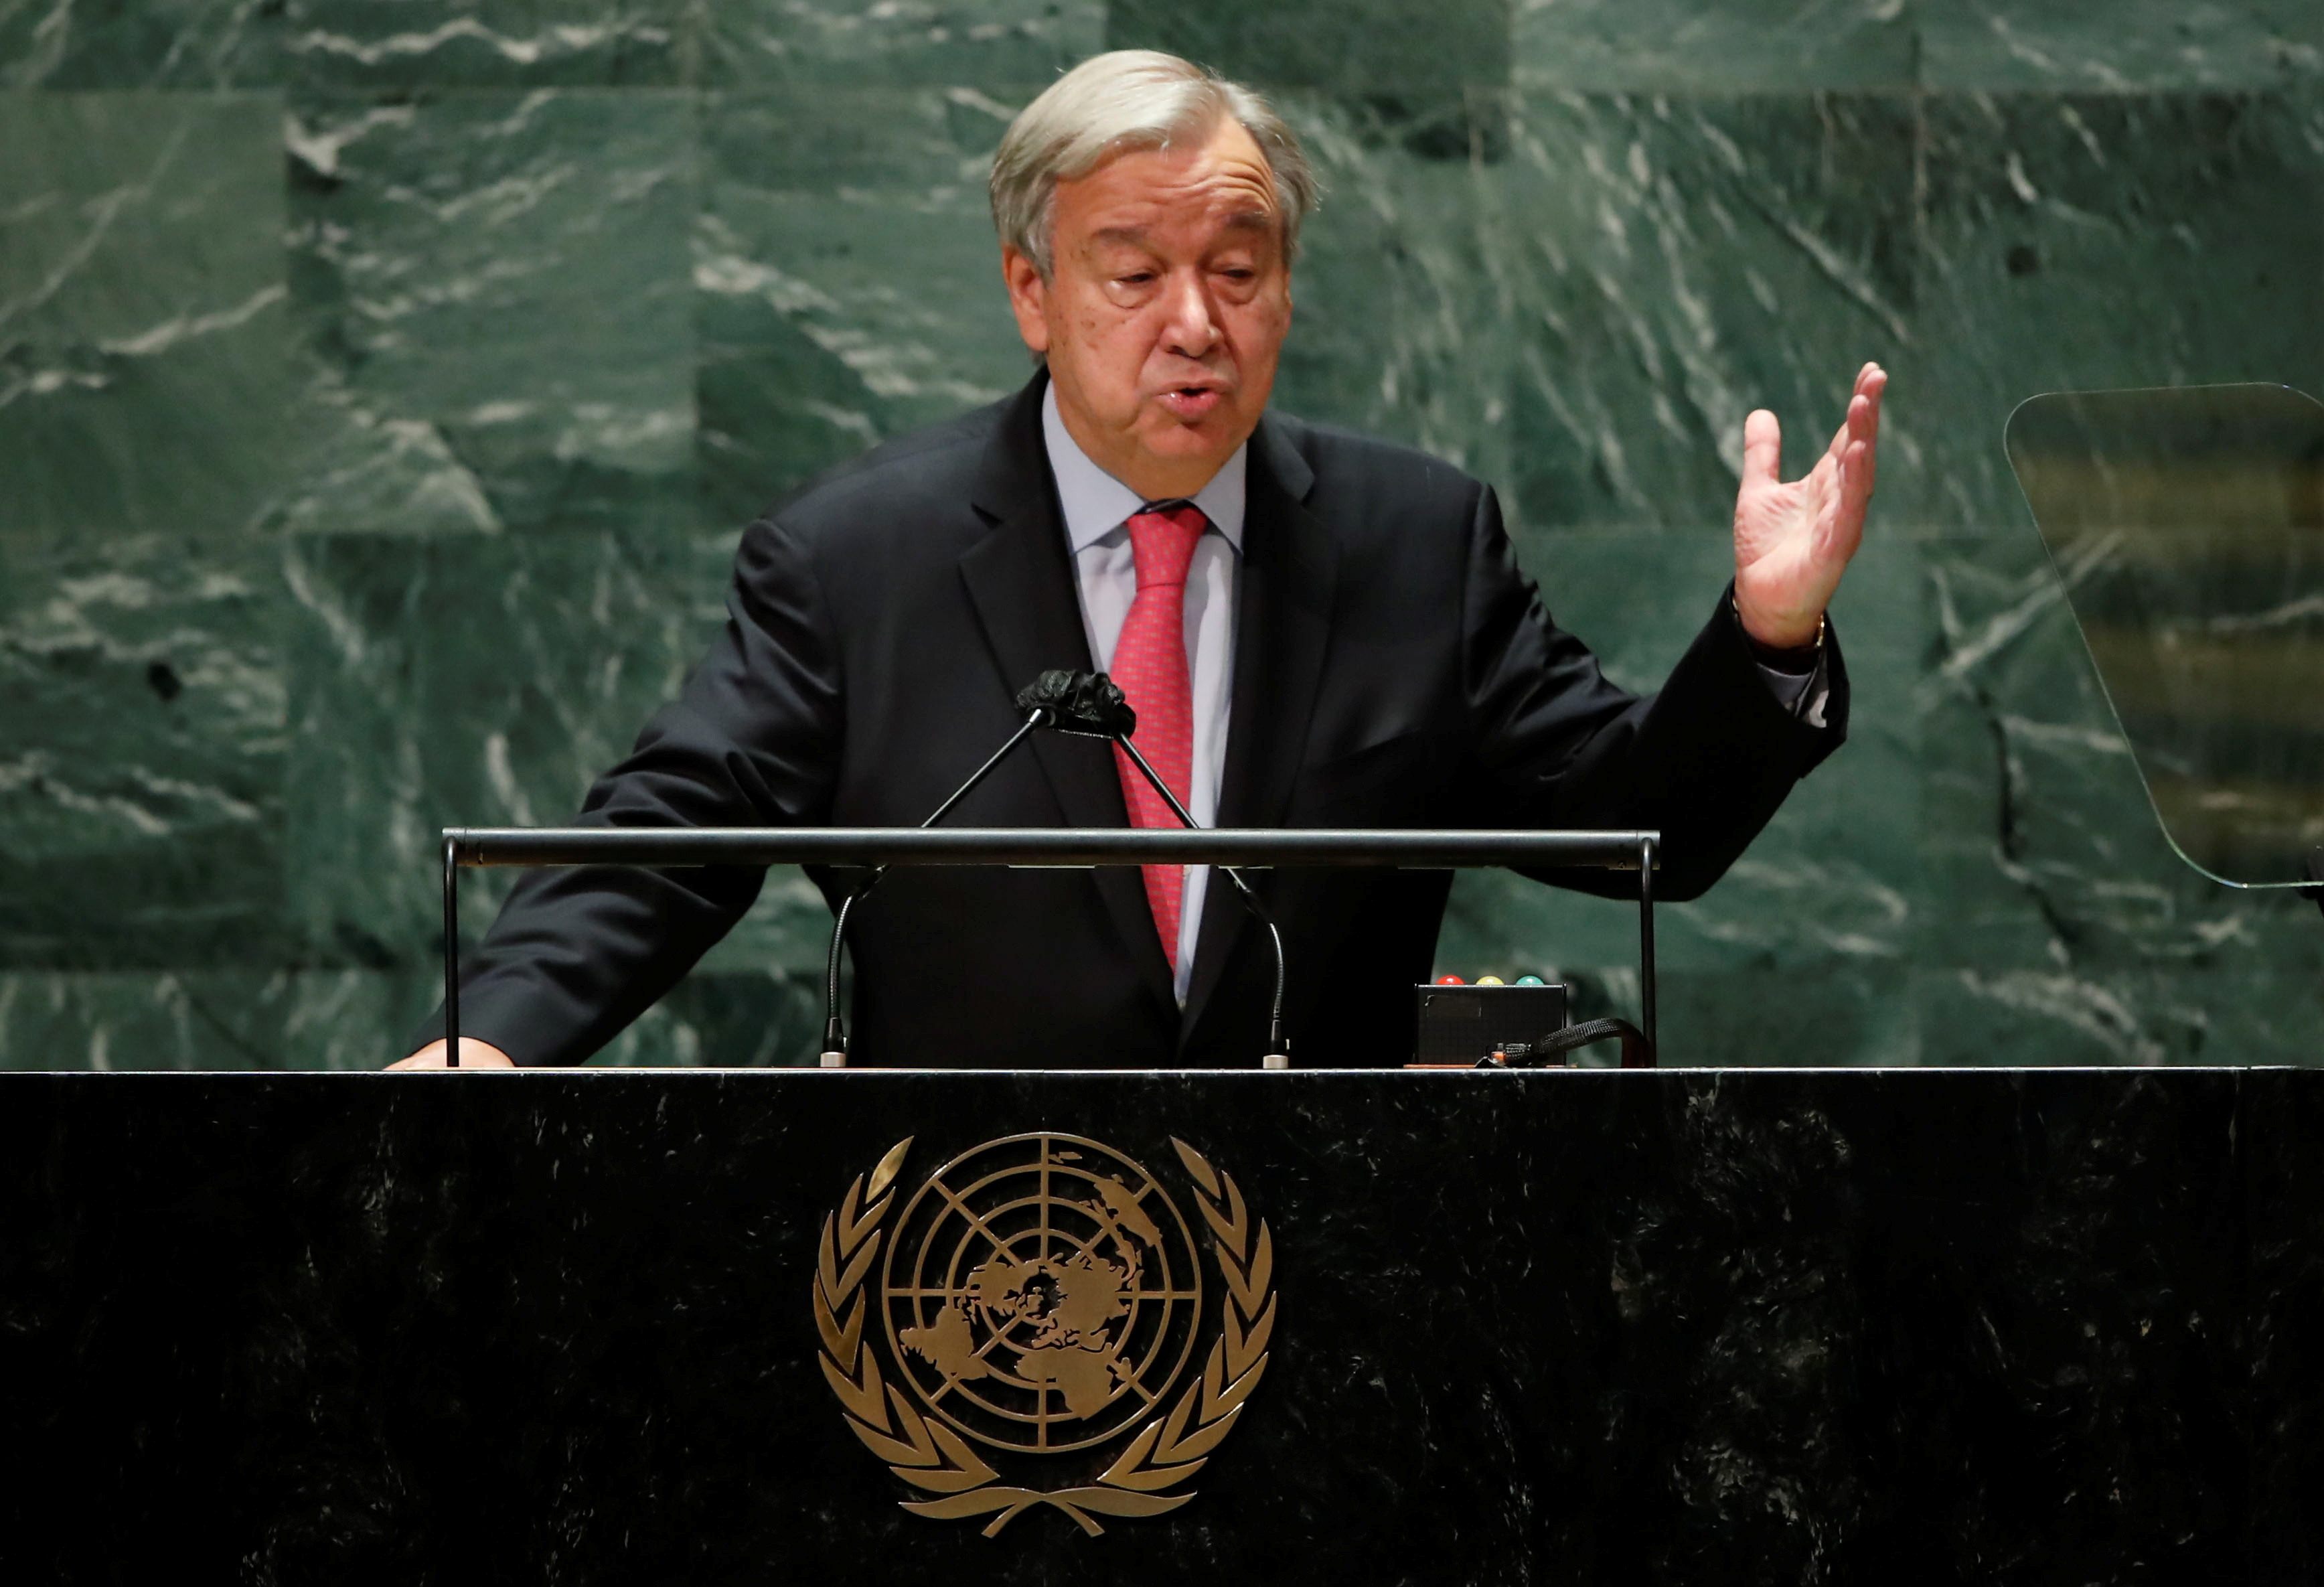 United Nations Secretary-General Antonio Guterres addresses the 76th Session of the U.N. General Assembly in New York City